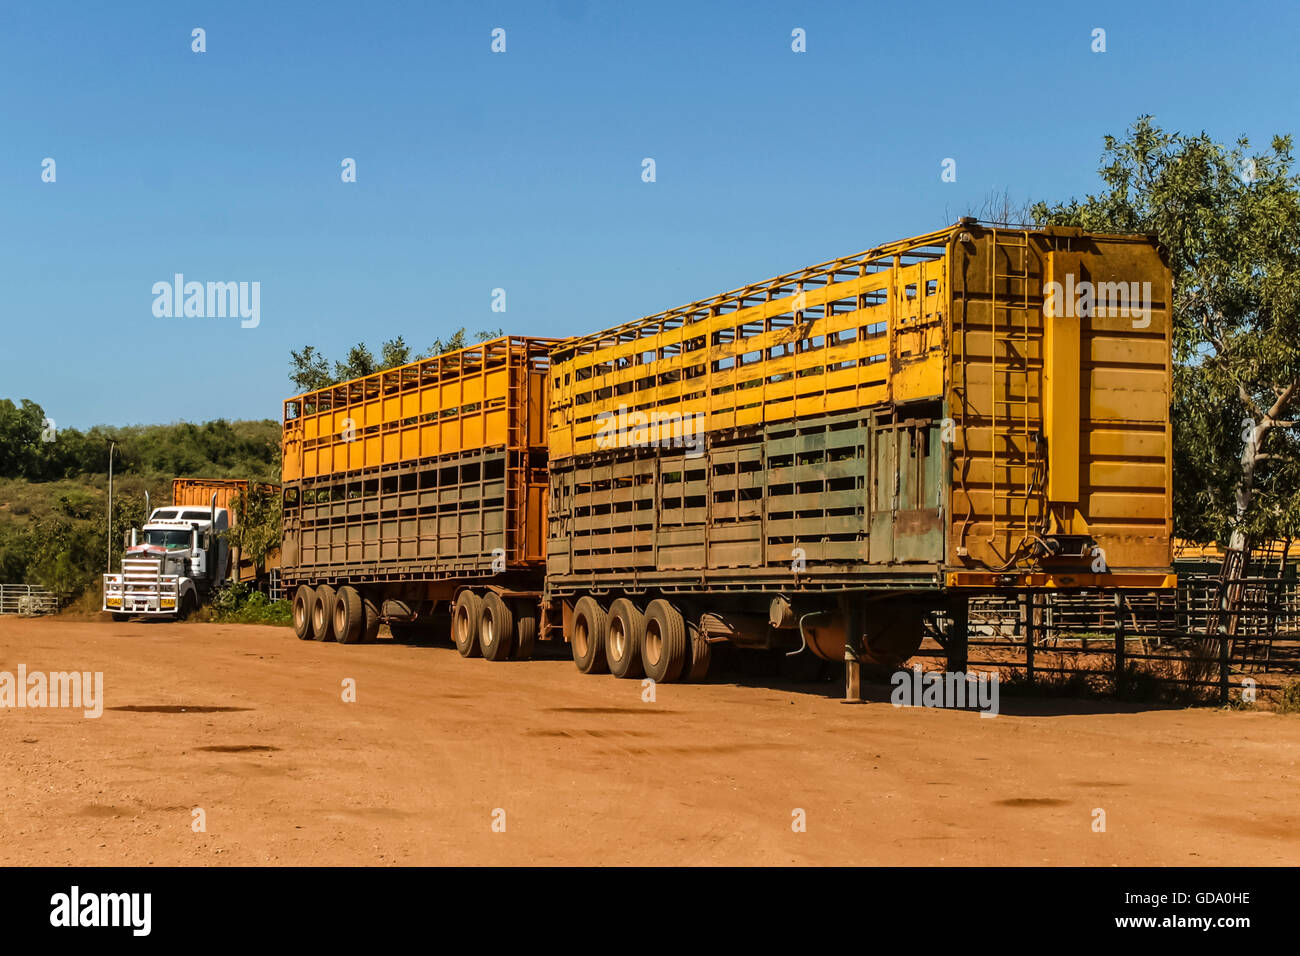 Road trains waiting for cattle to be loaded. at Broome in Western Australia Stock Photo